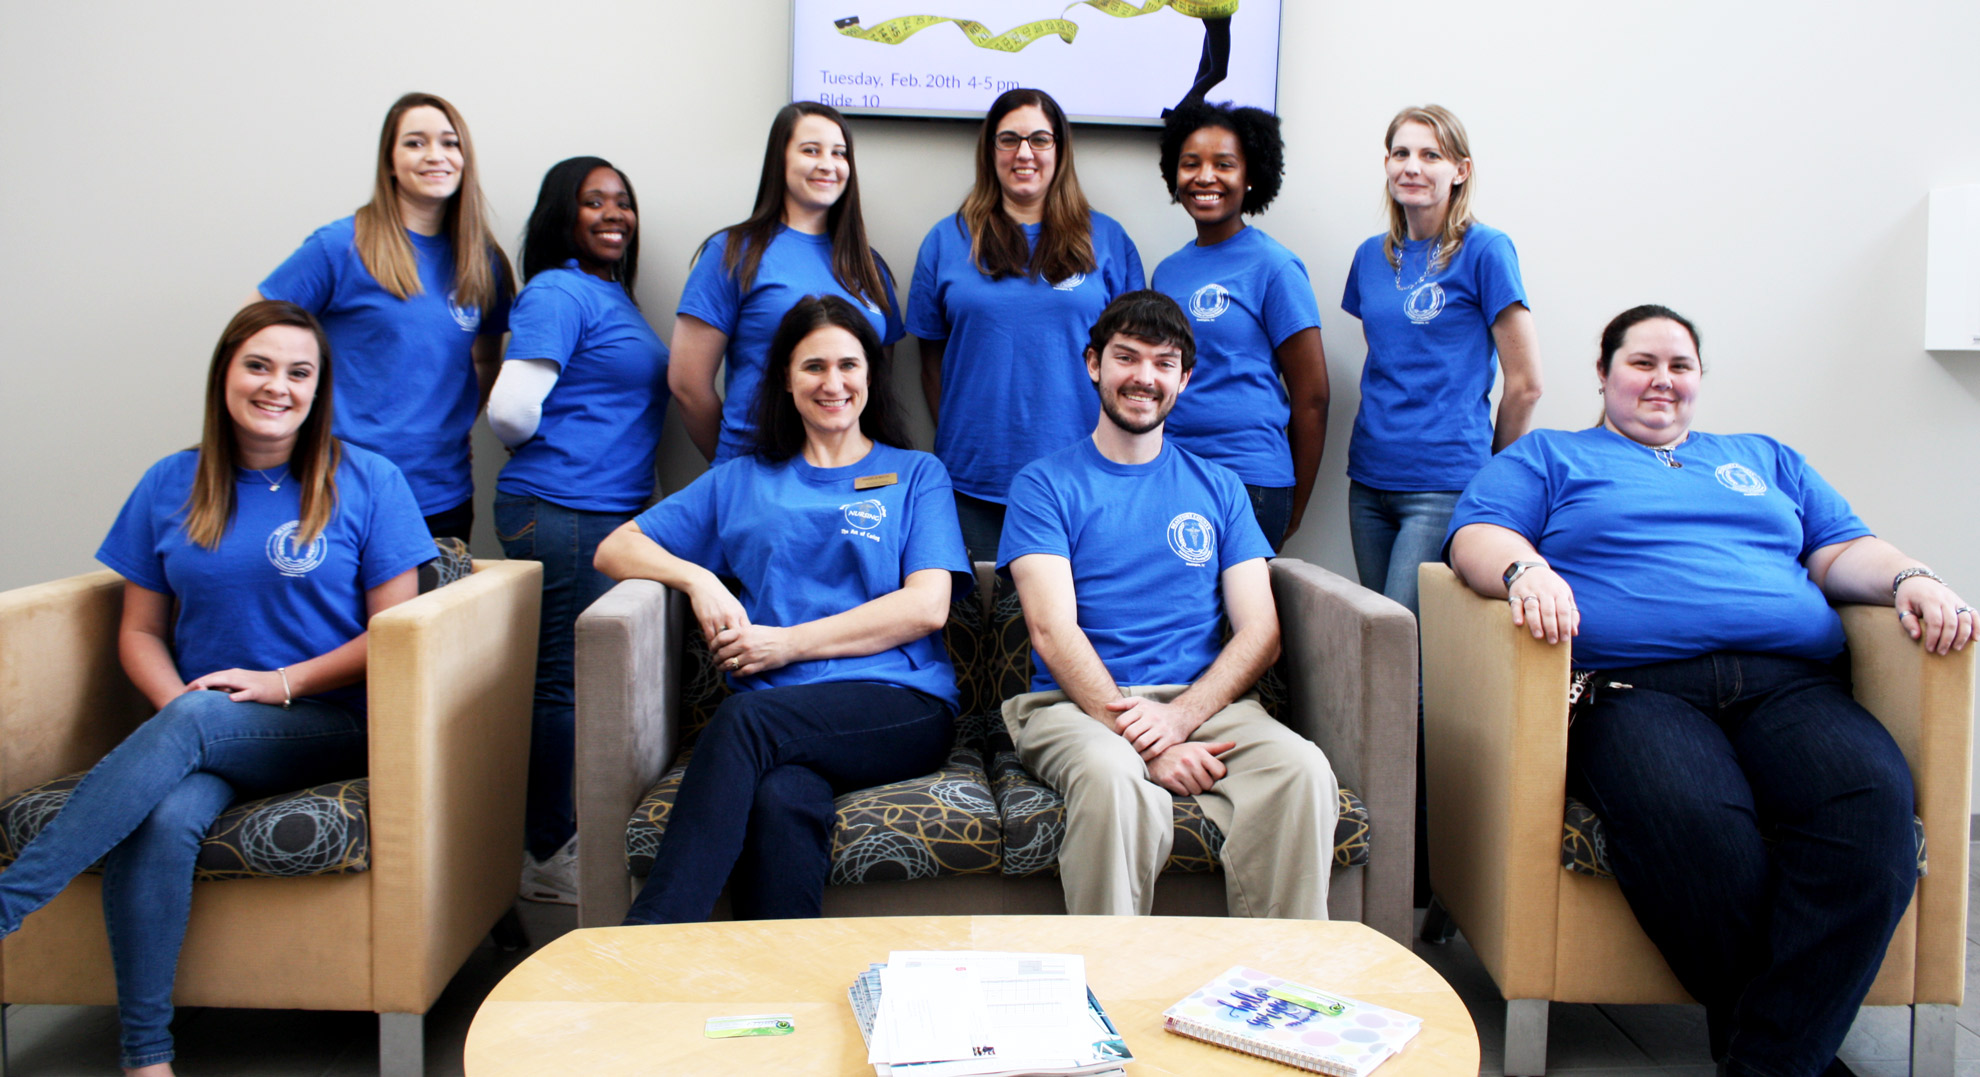 Ten students in blue t-shirts in two rows. Front row (left to right): Makayla Cutler, VP; Angela Boyd, Faculty Advisor; James Matthews, President; and Jessie Godley, Social Event Coordinator. Back row (left to right): Logan Barber, Historian; India Allen, LPN Rep; Brittany Wiggins, Historian; Kristen Battershell, Secretary; Michelle Ashe, Treasurer; and Daniell Davenport, Social Event Coordinator.  Not pictured: Morgan Peed, LPN representative.